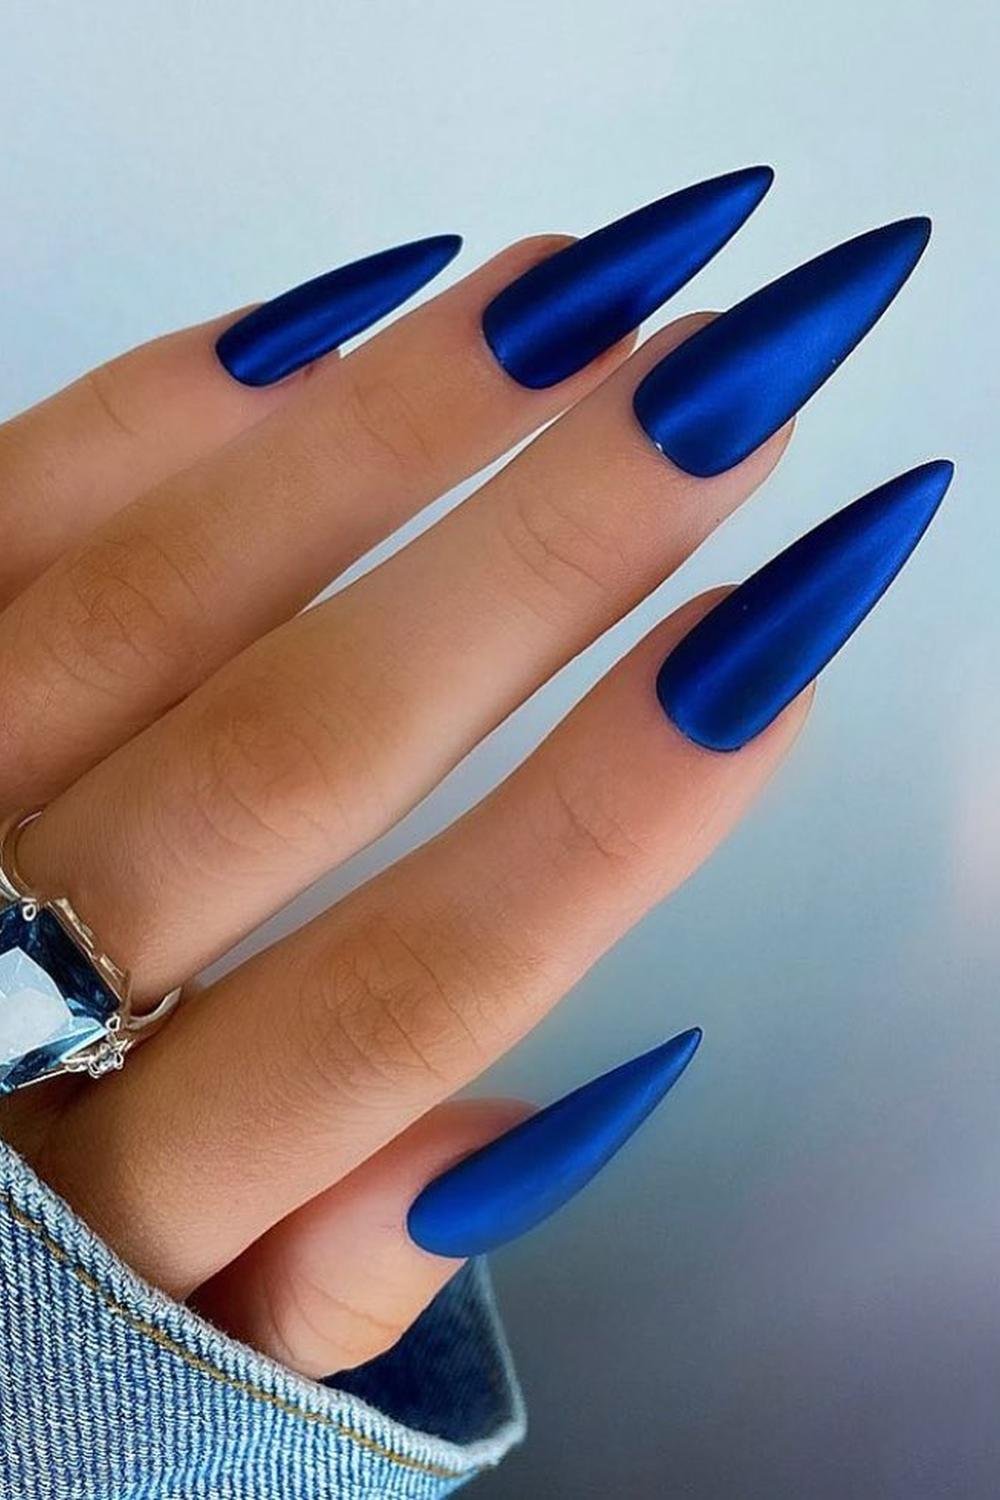 21 - Picture of Blue Chrome Nails